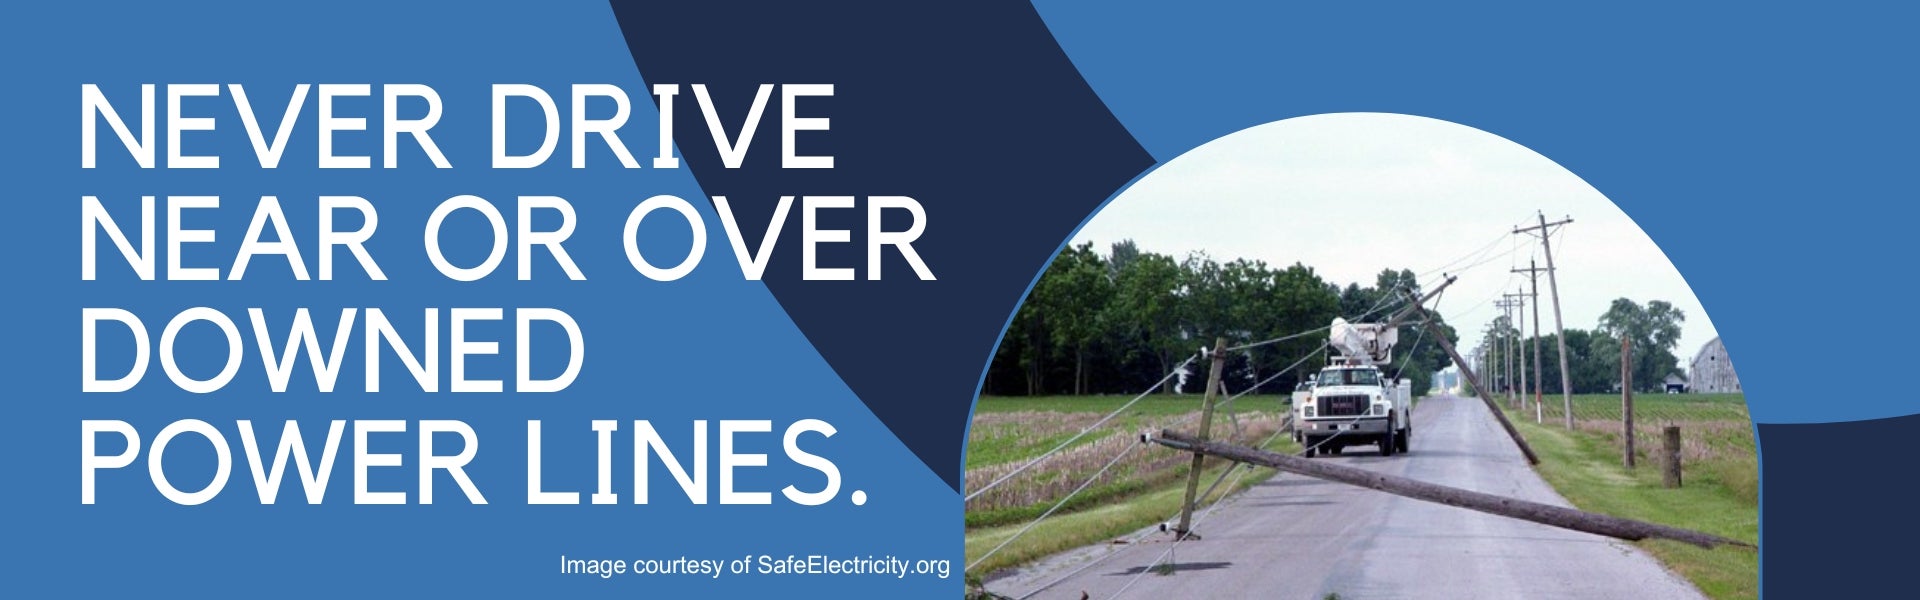 Be aware of downed power lines - spring storms